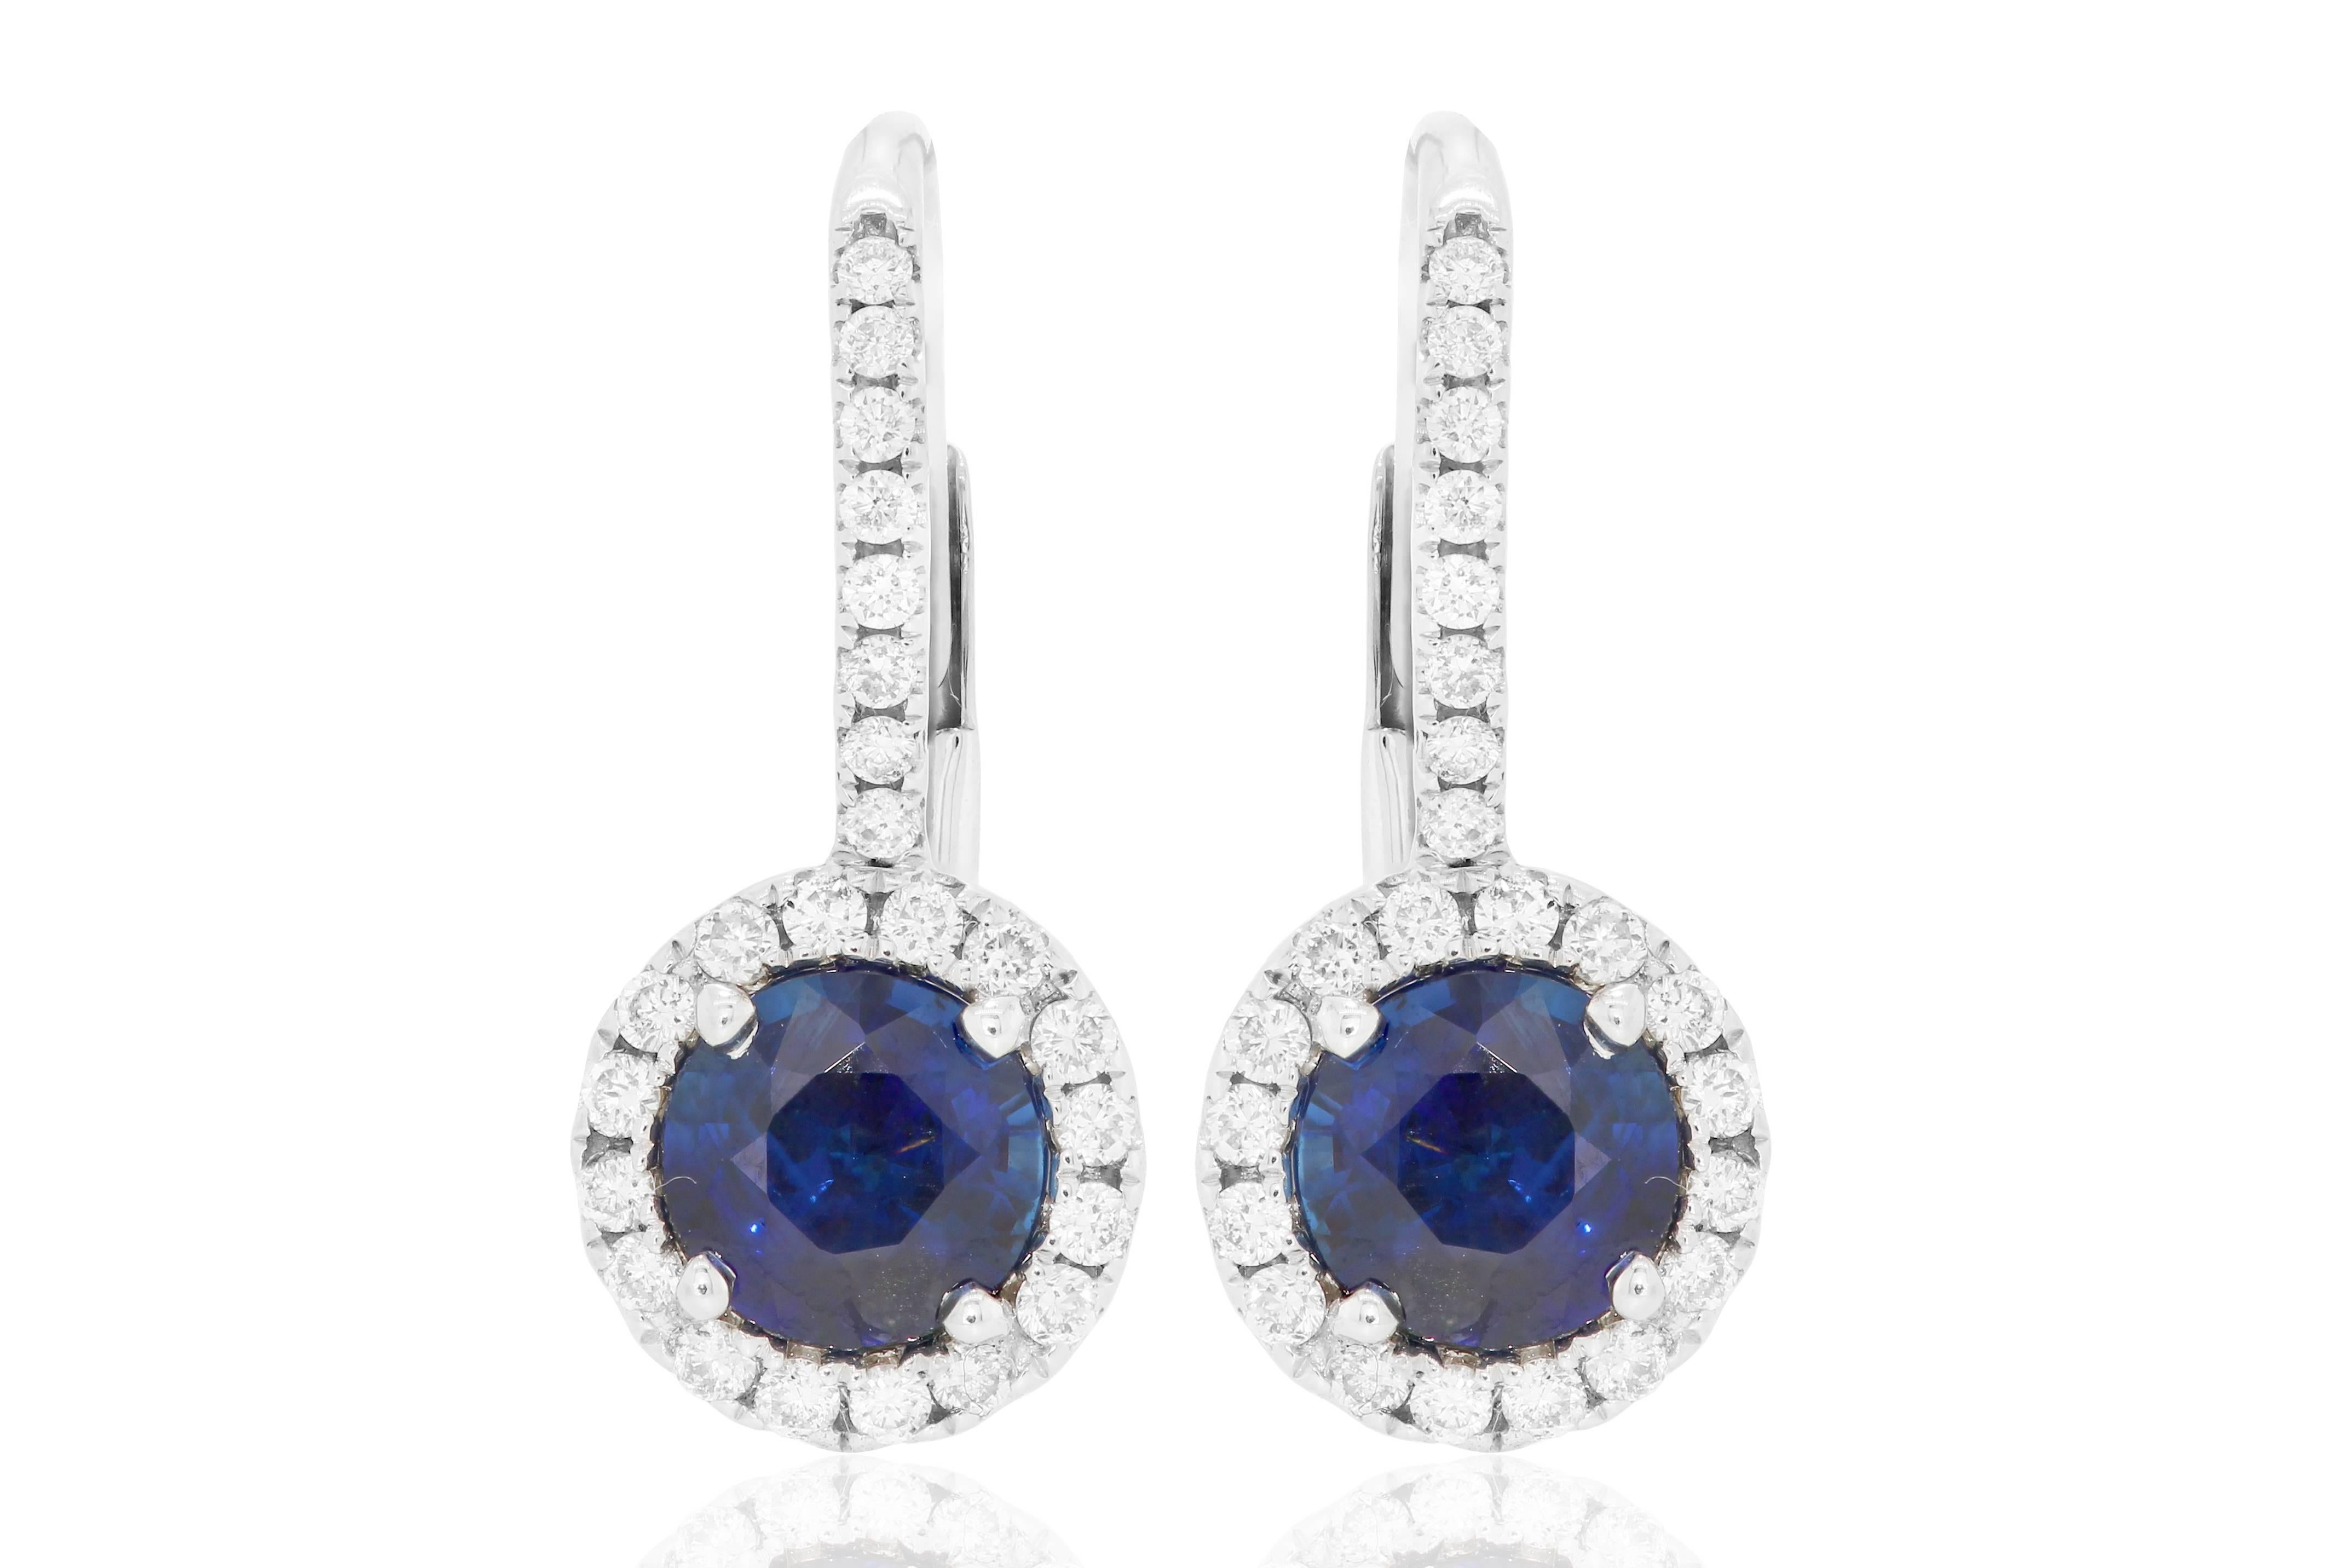 Very Nice Color and quality Royal Blue Sapphire Rounds 2.25 Carat encircled in Halo of white diamond 0.50 Carat in 14K white Gold gorgeous Dangle earring. 

Style available in different price ranges. Prices are based on your selection of 4C's Cut,